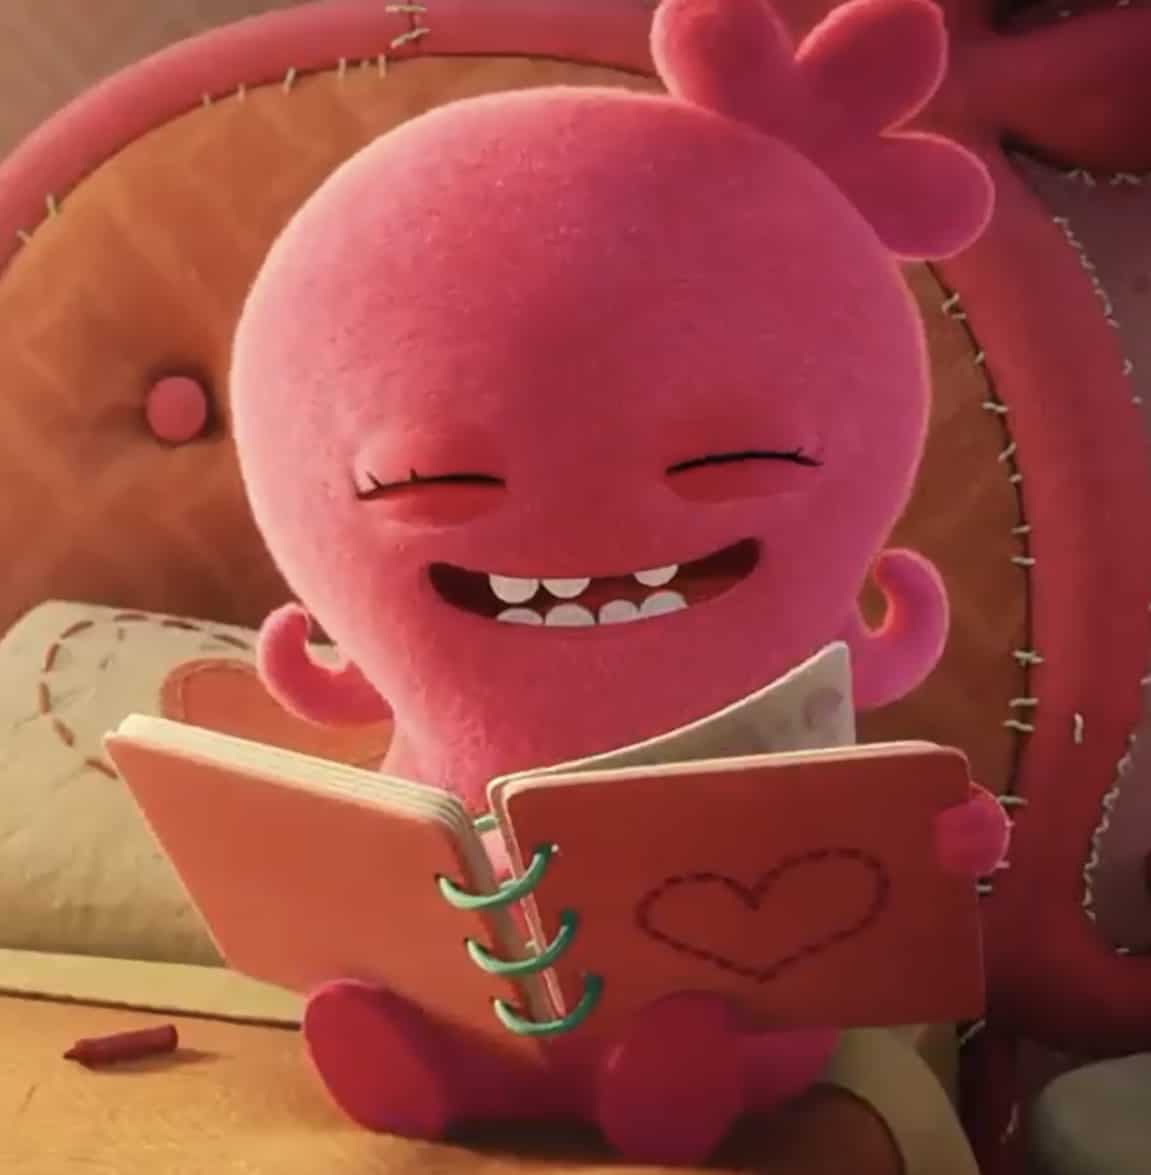 Moxy played by Kelly Clarkson in the movie UglyDolls